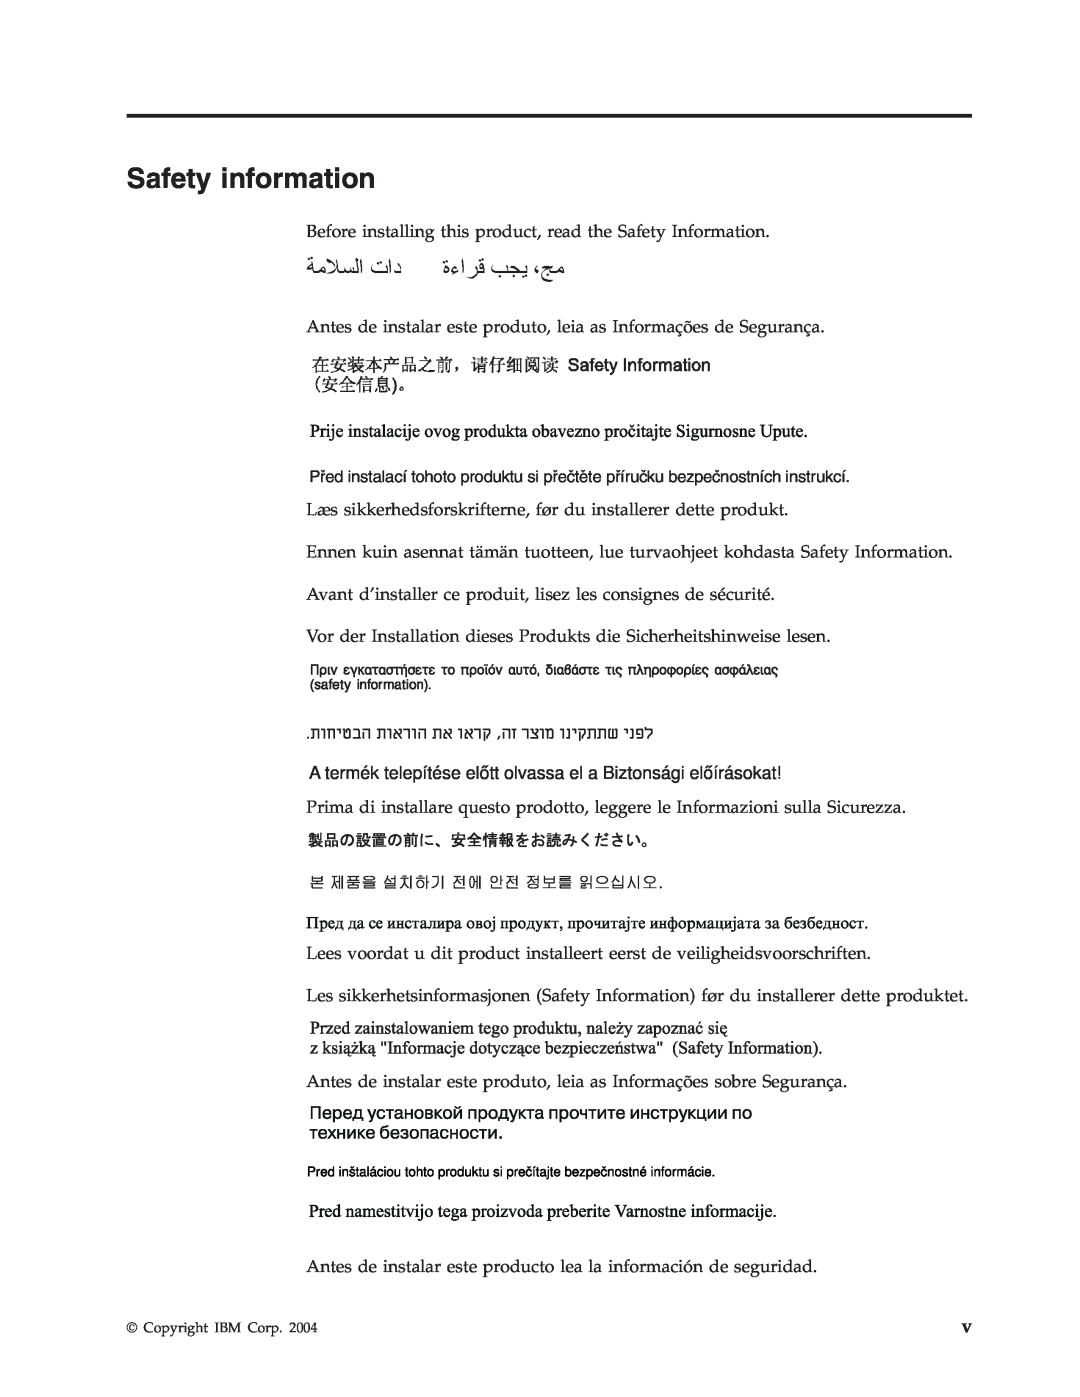 IBM PROJECTOR C400 manual Safety information 